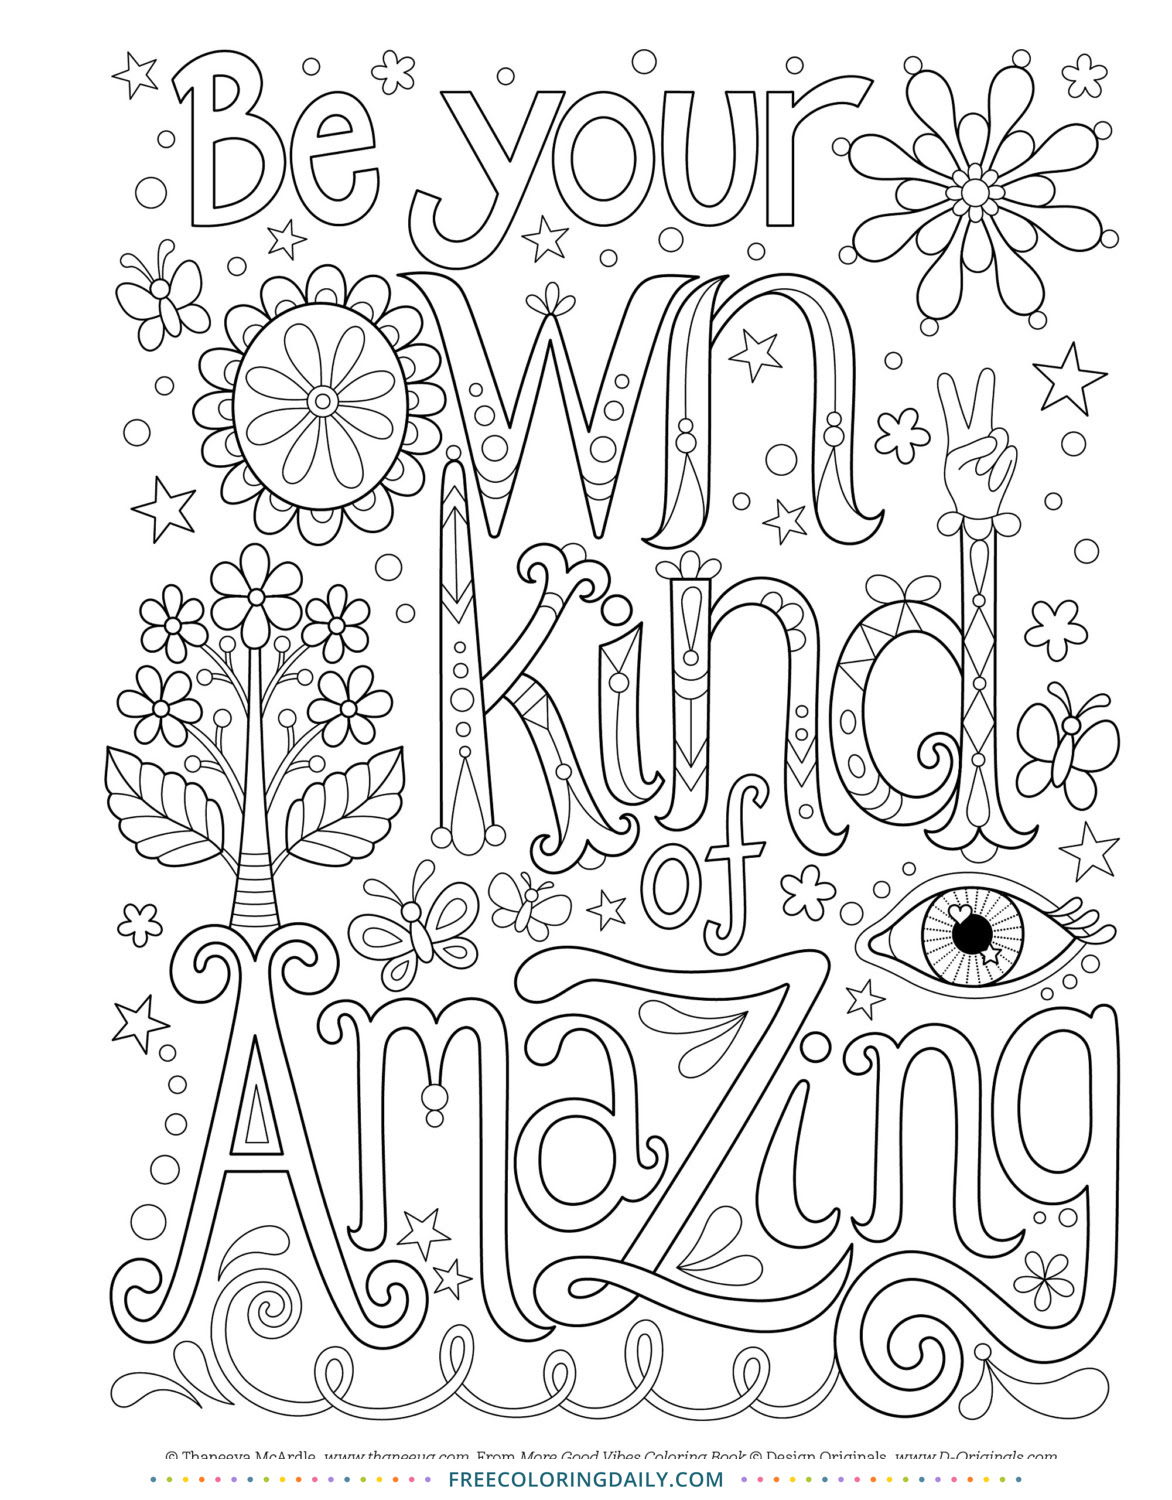 Download Free Quote Coloring Page | Free Coloring Daily